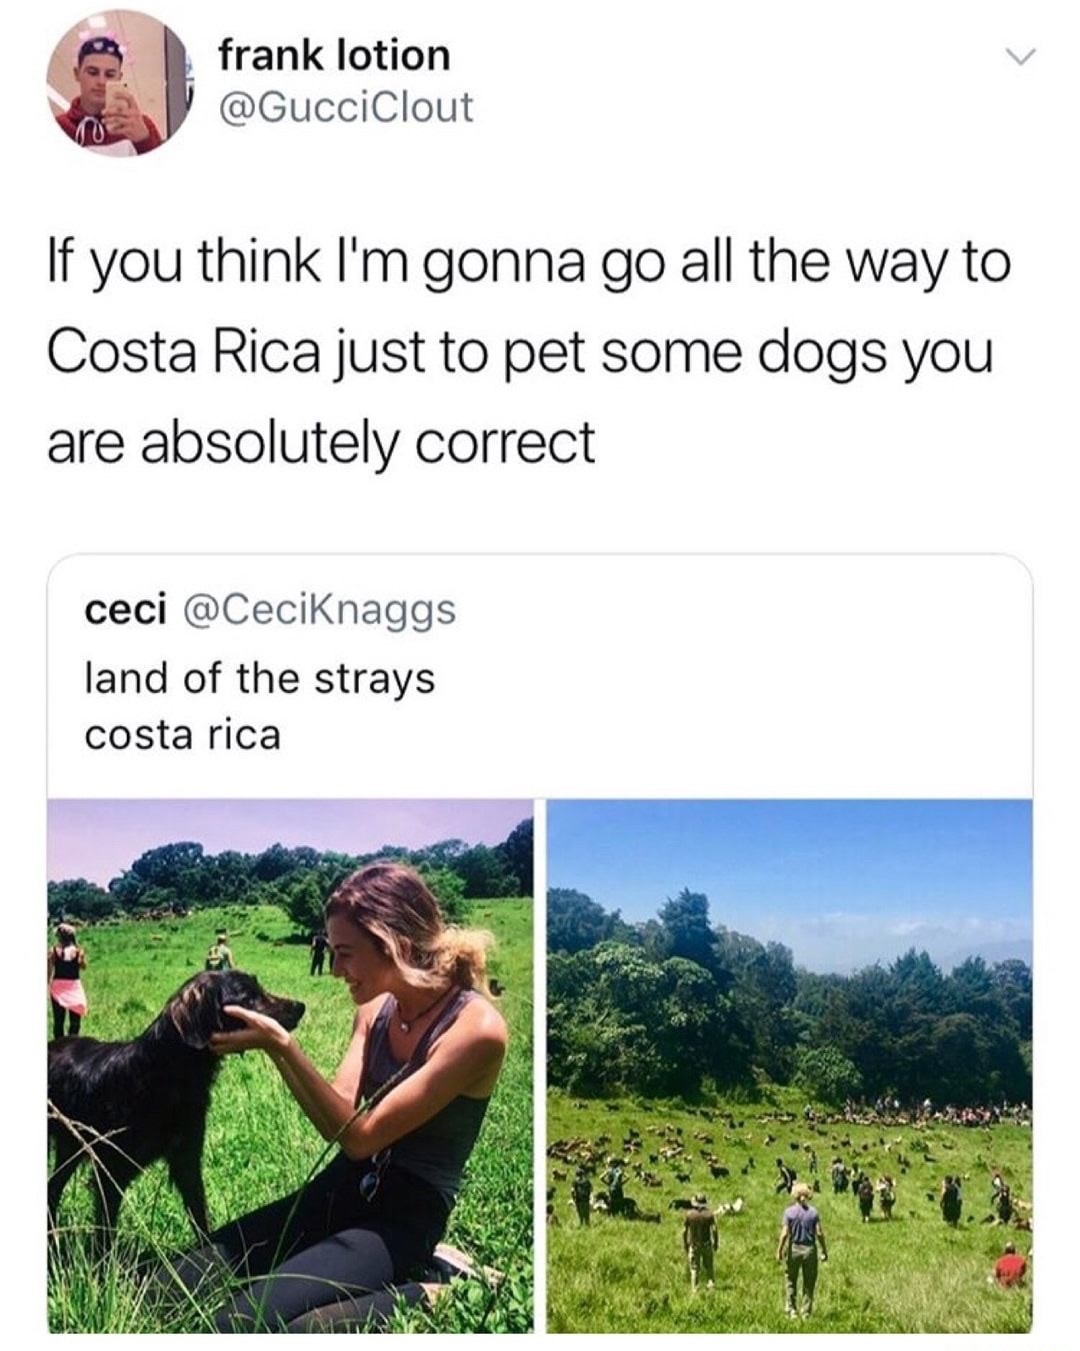 costa rica - frank lotion If you think I'm gonna go all the way to Costa Rica just to pet some dogs you are absolutely correct ceci land of the strays costa rica